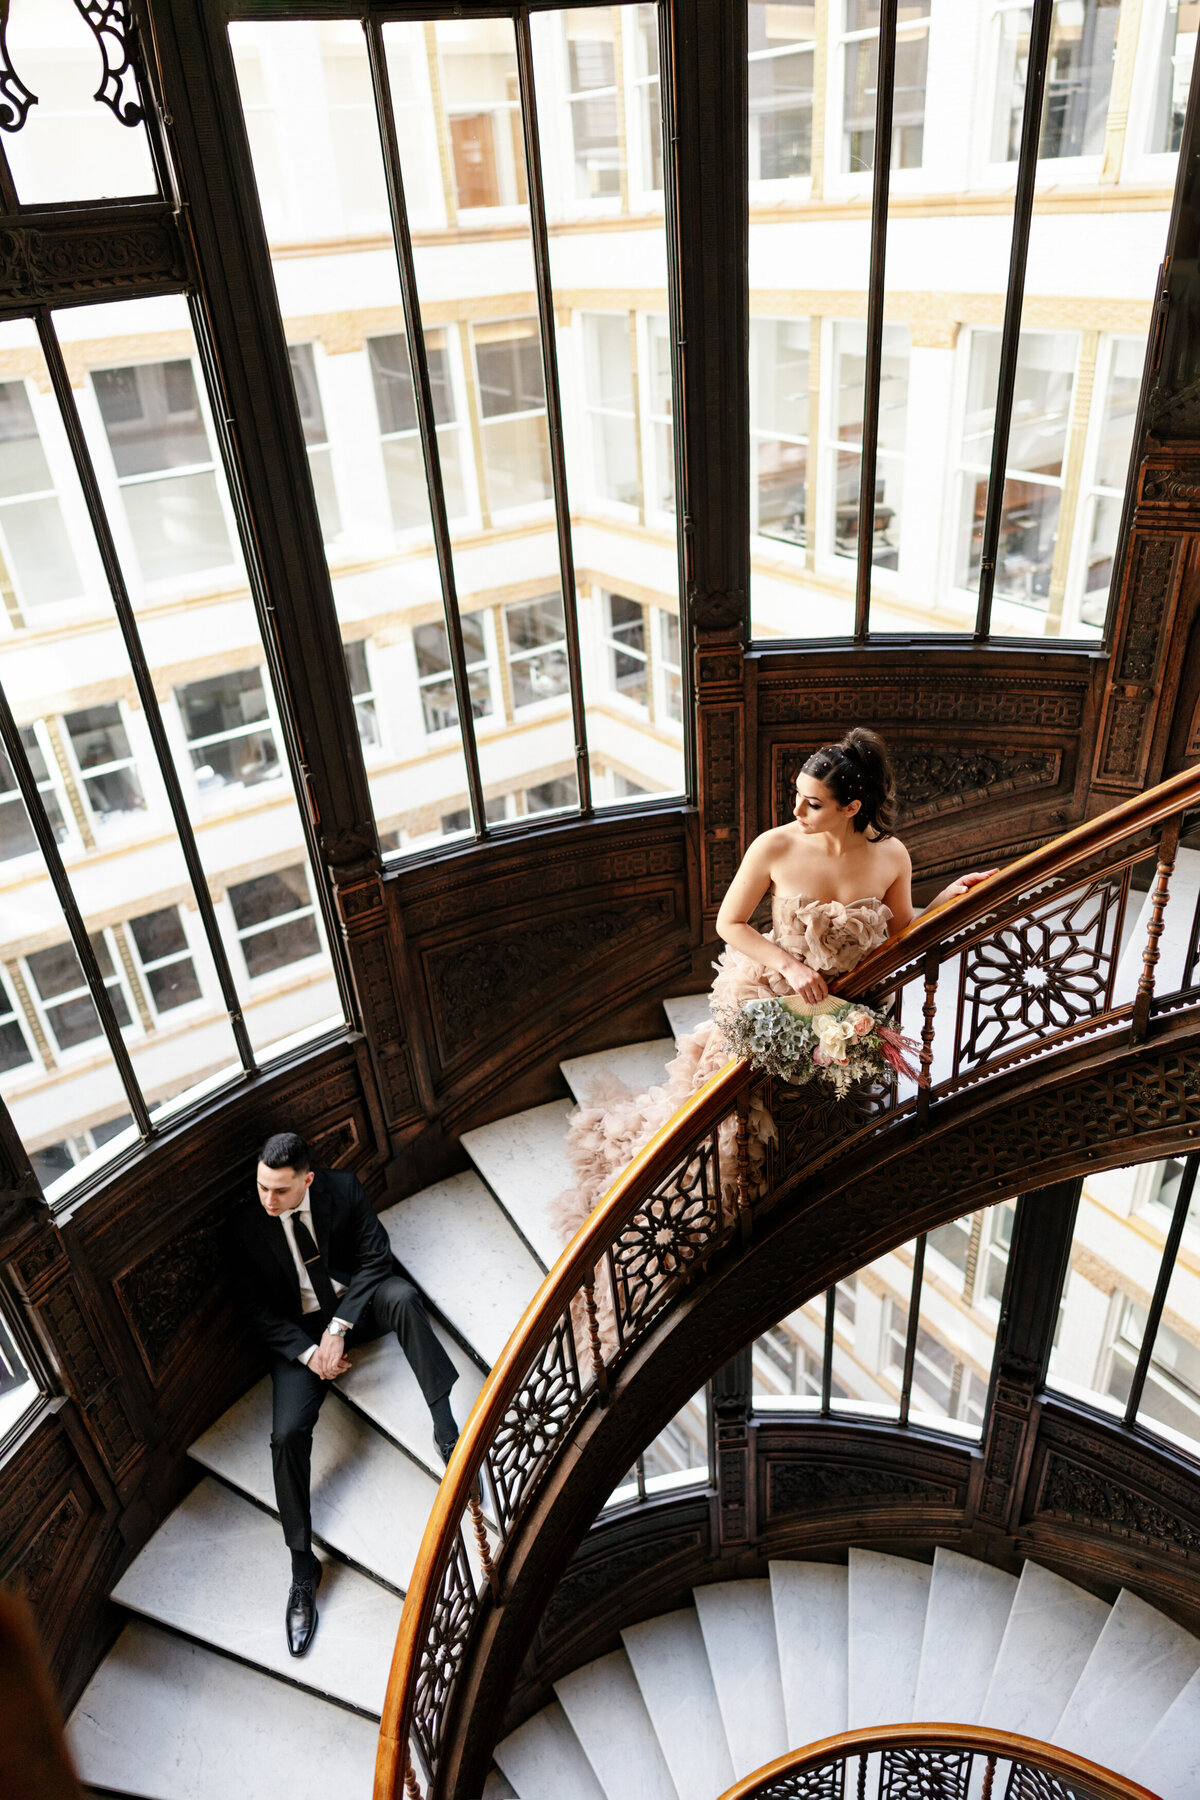 Aspen-Avenue-Chicago-Wedding-Photographer-Rookery-Engagement-Session-Histoircal-Stairs-Moody-Dramatic-Magazine-Unique-Gown-Stemming-From-Love-Emily-Rae-Bridal-Hair-FAV-21